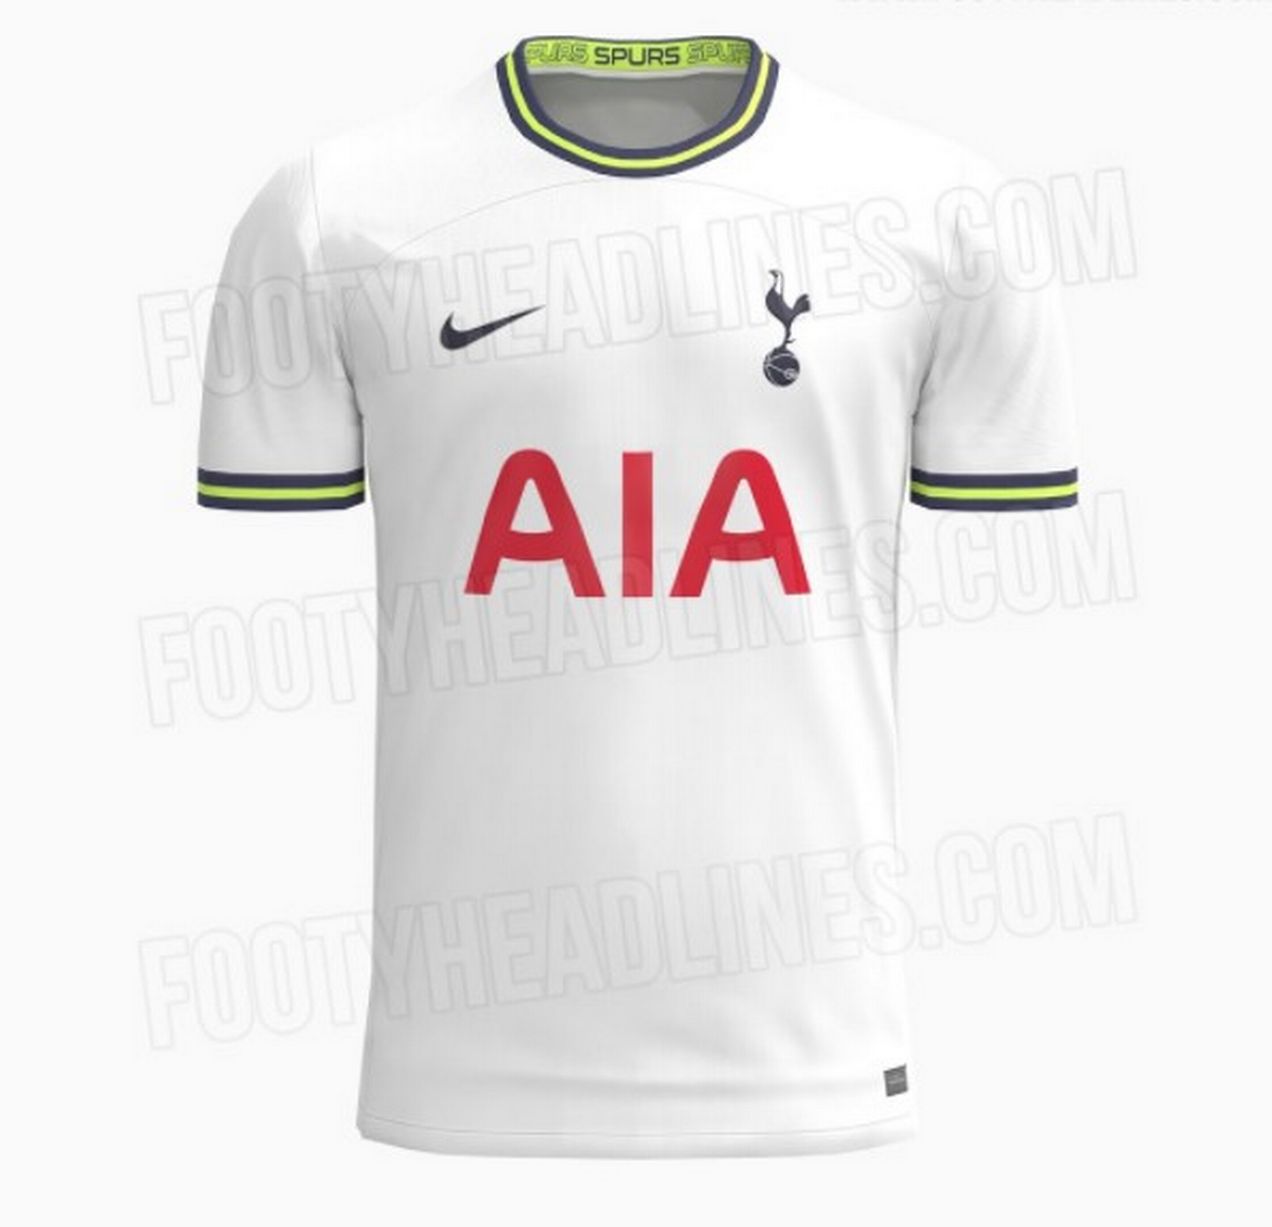 Tottenham Hotspur fans have been given a sneak peek at the new home kit that the players will unveil next week against Aston Villa.